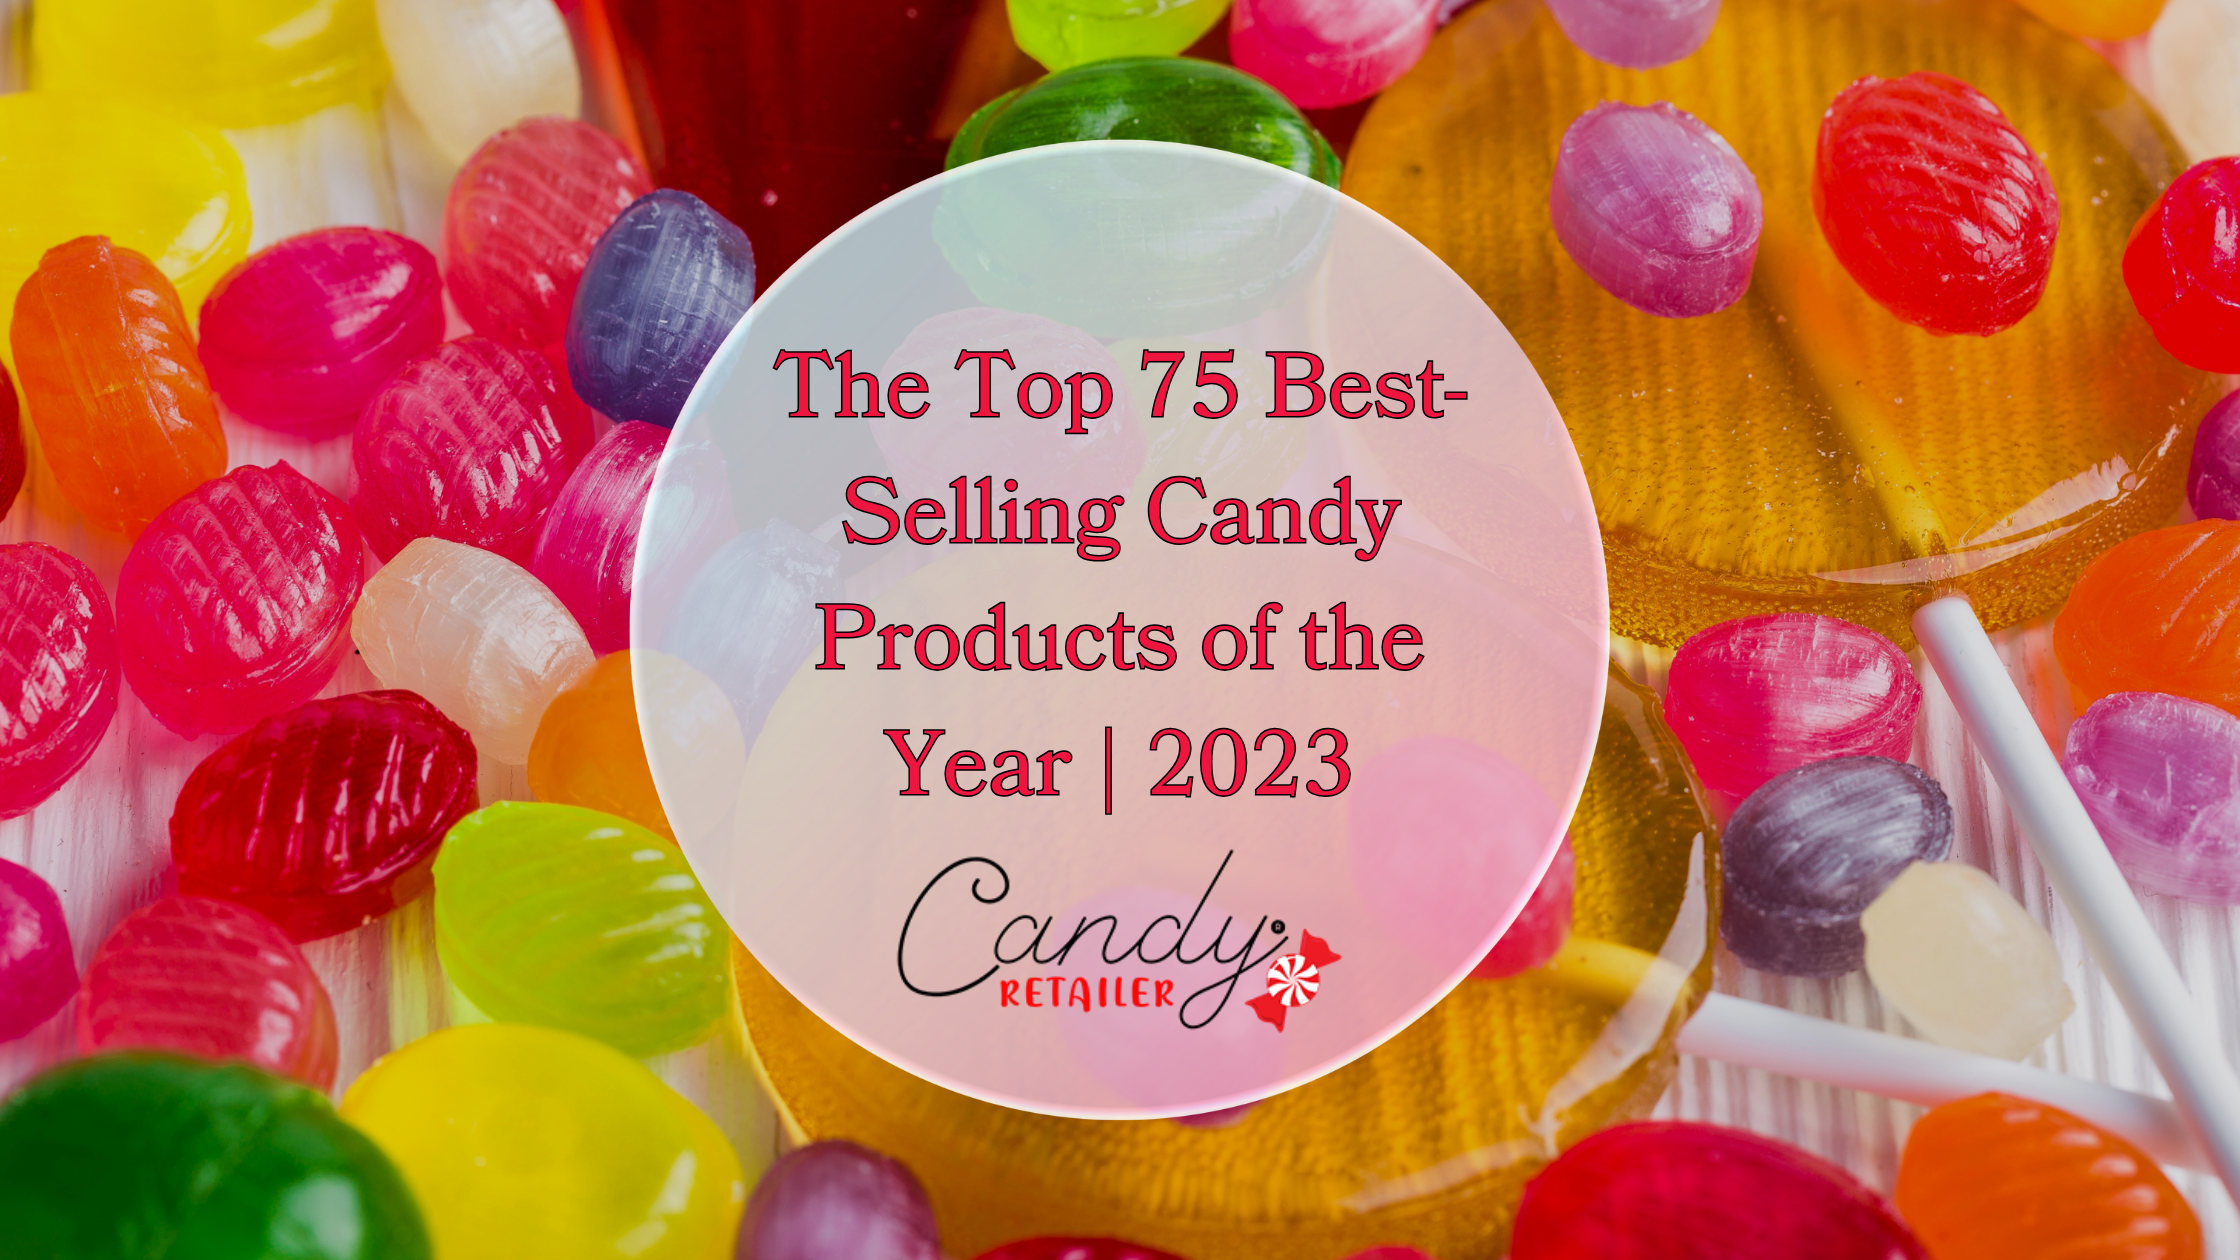 The Top 75 Best-Selling Candy Products of the Year